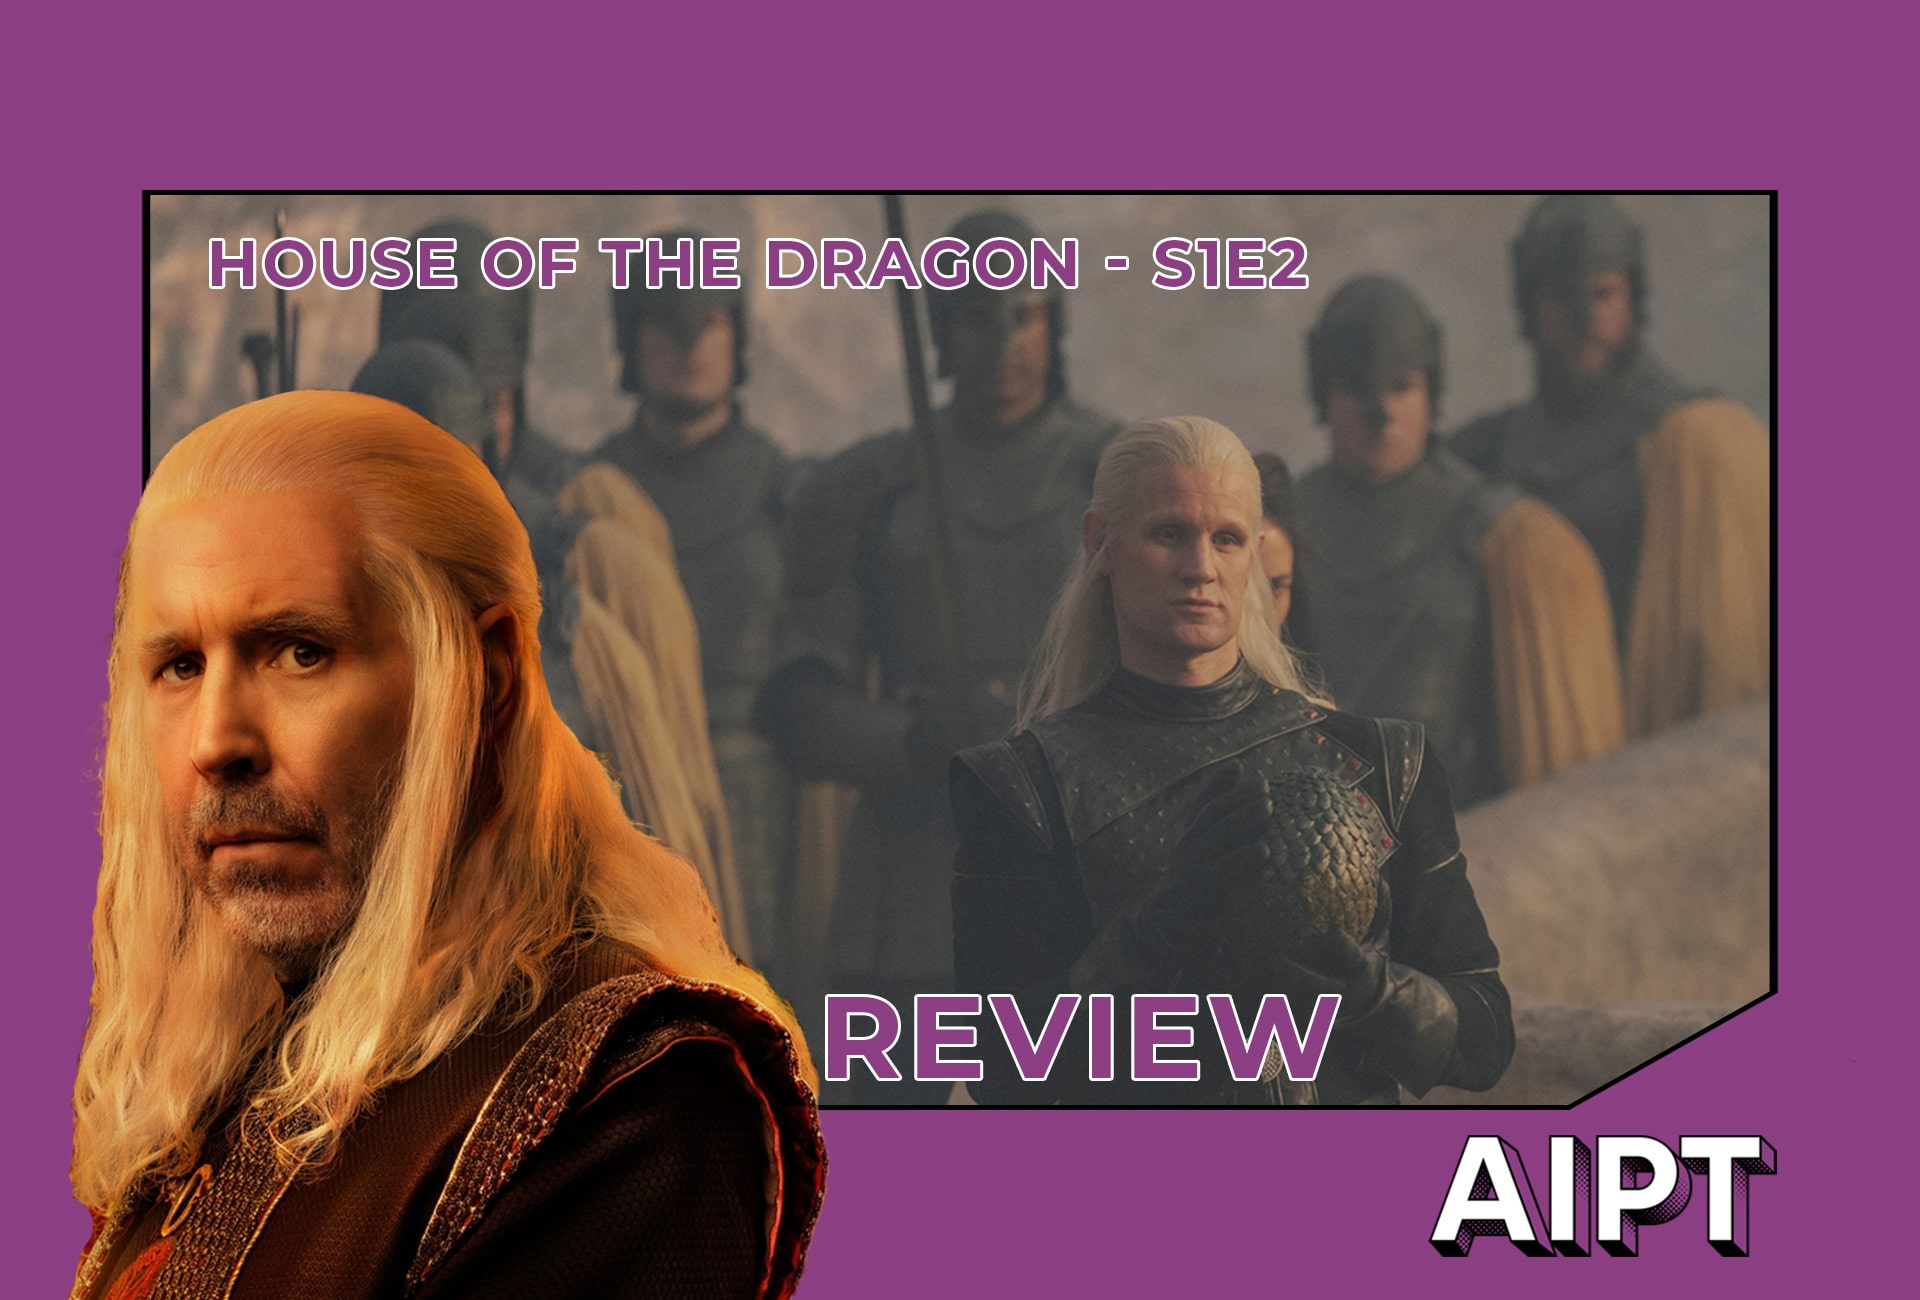 'House of the Dragon' S1E2 'The Rogue Prince' review